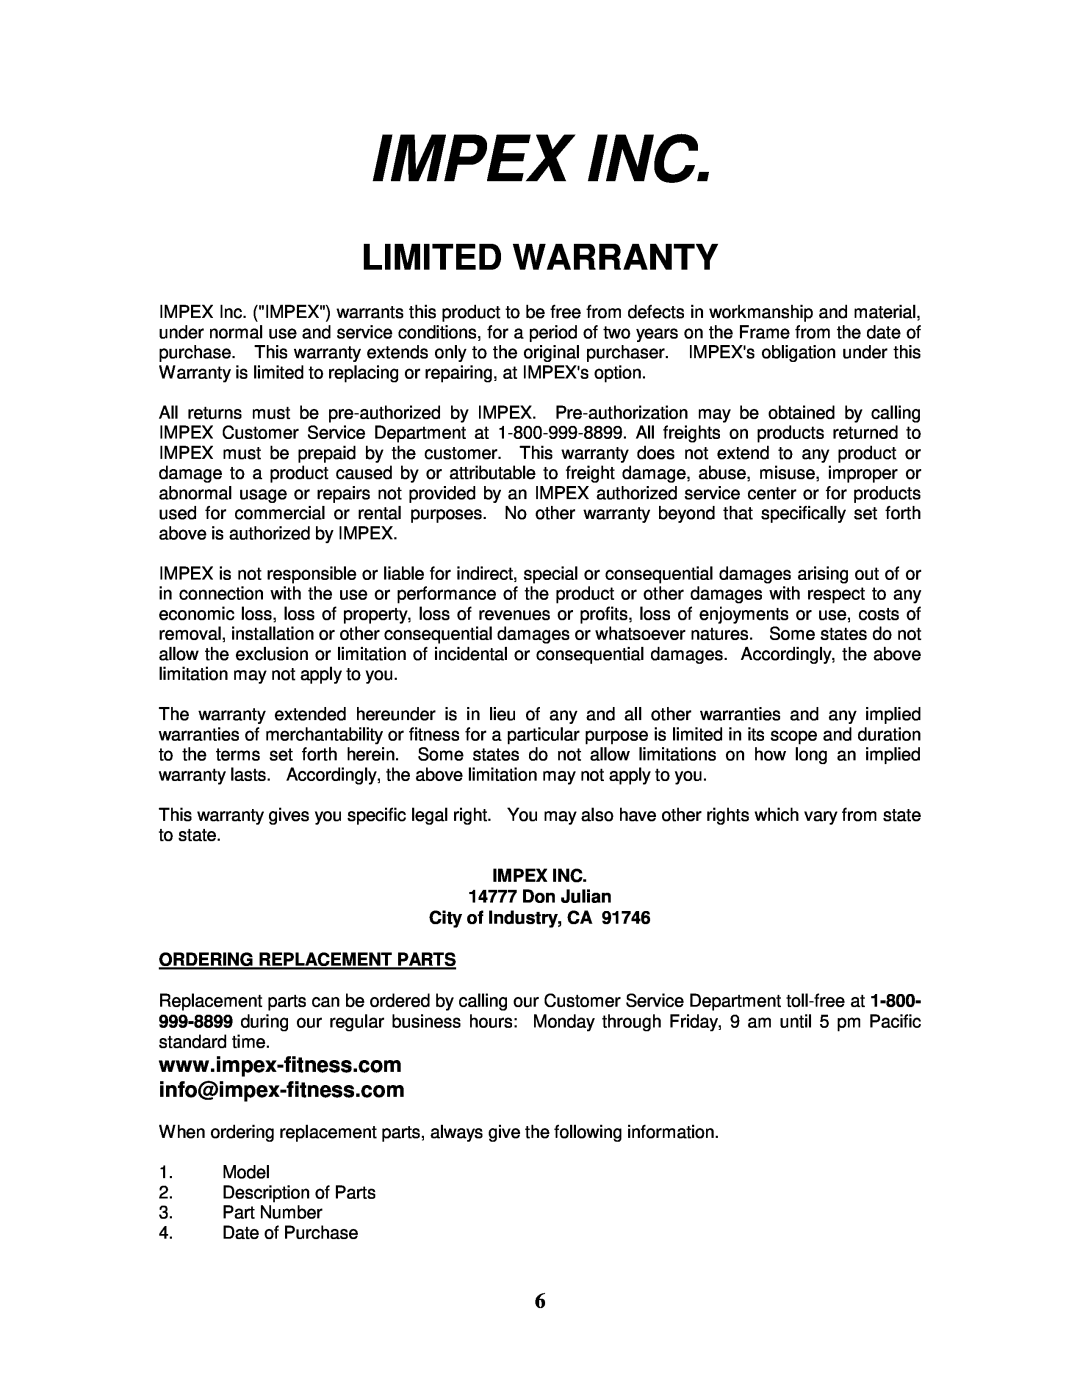 Impex PT-45 manual Impex Inc, Limited Warranty, IMPEX INC 14777 Don Julian City of Industry, CA, Ordering Replacement Parts 